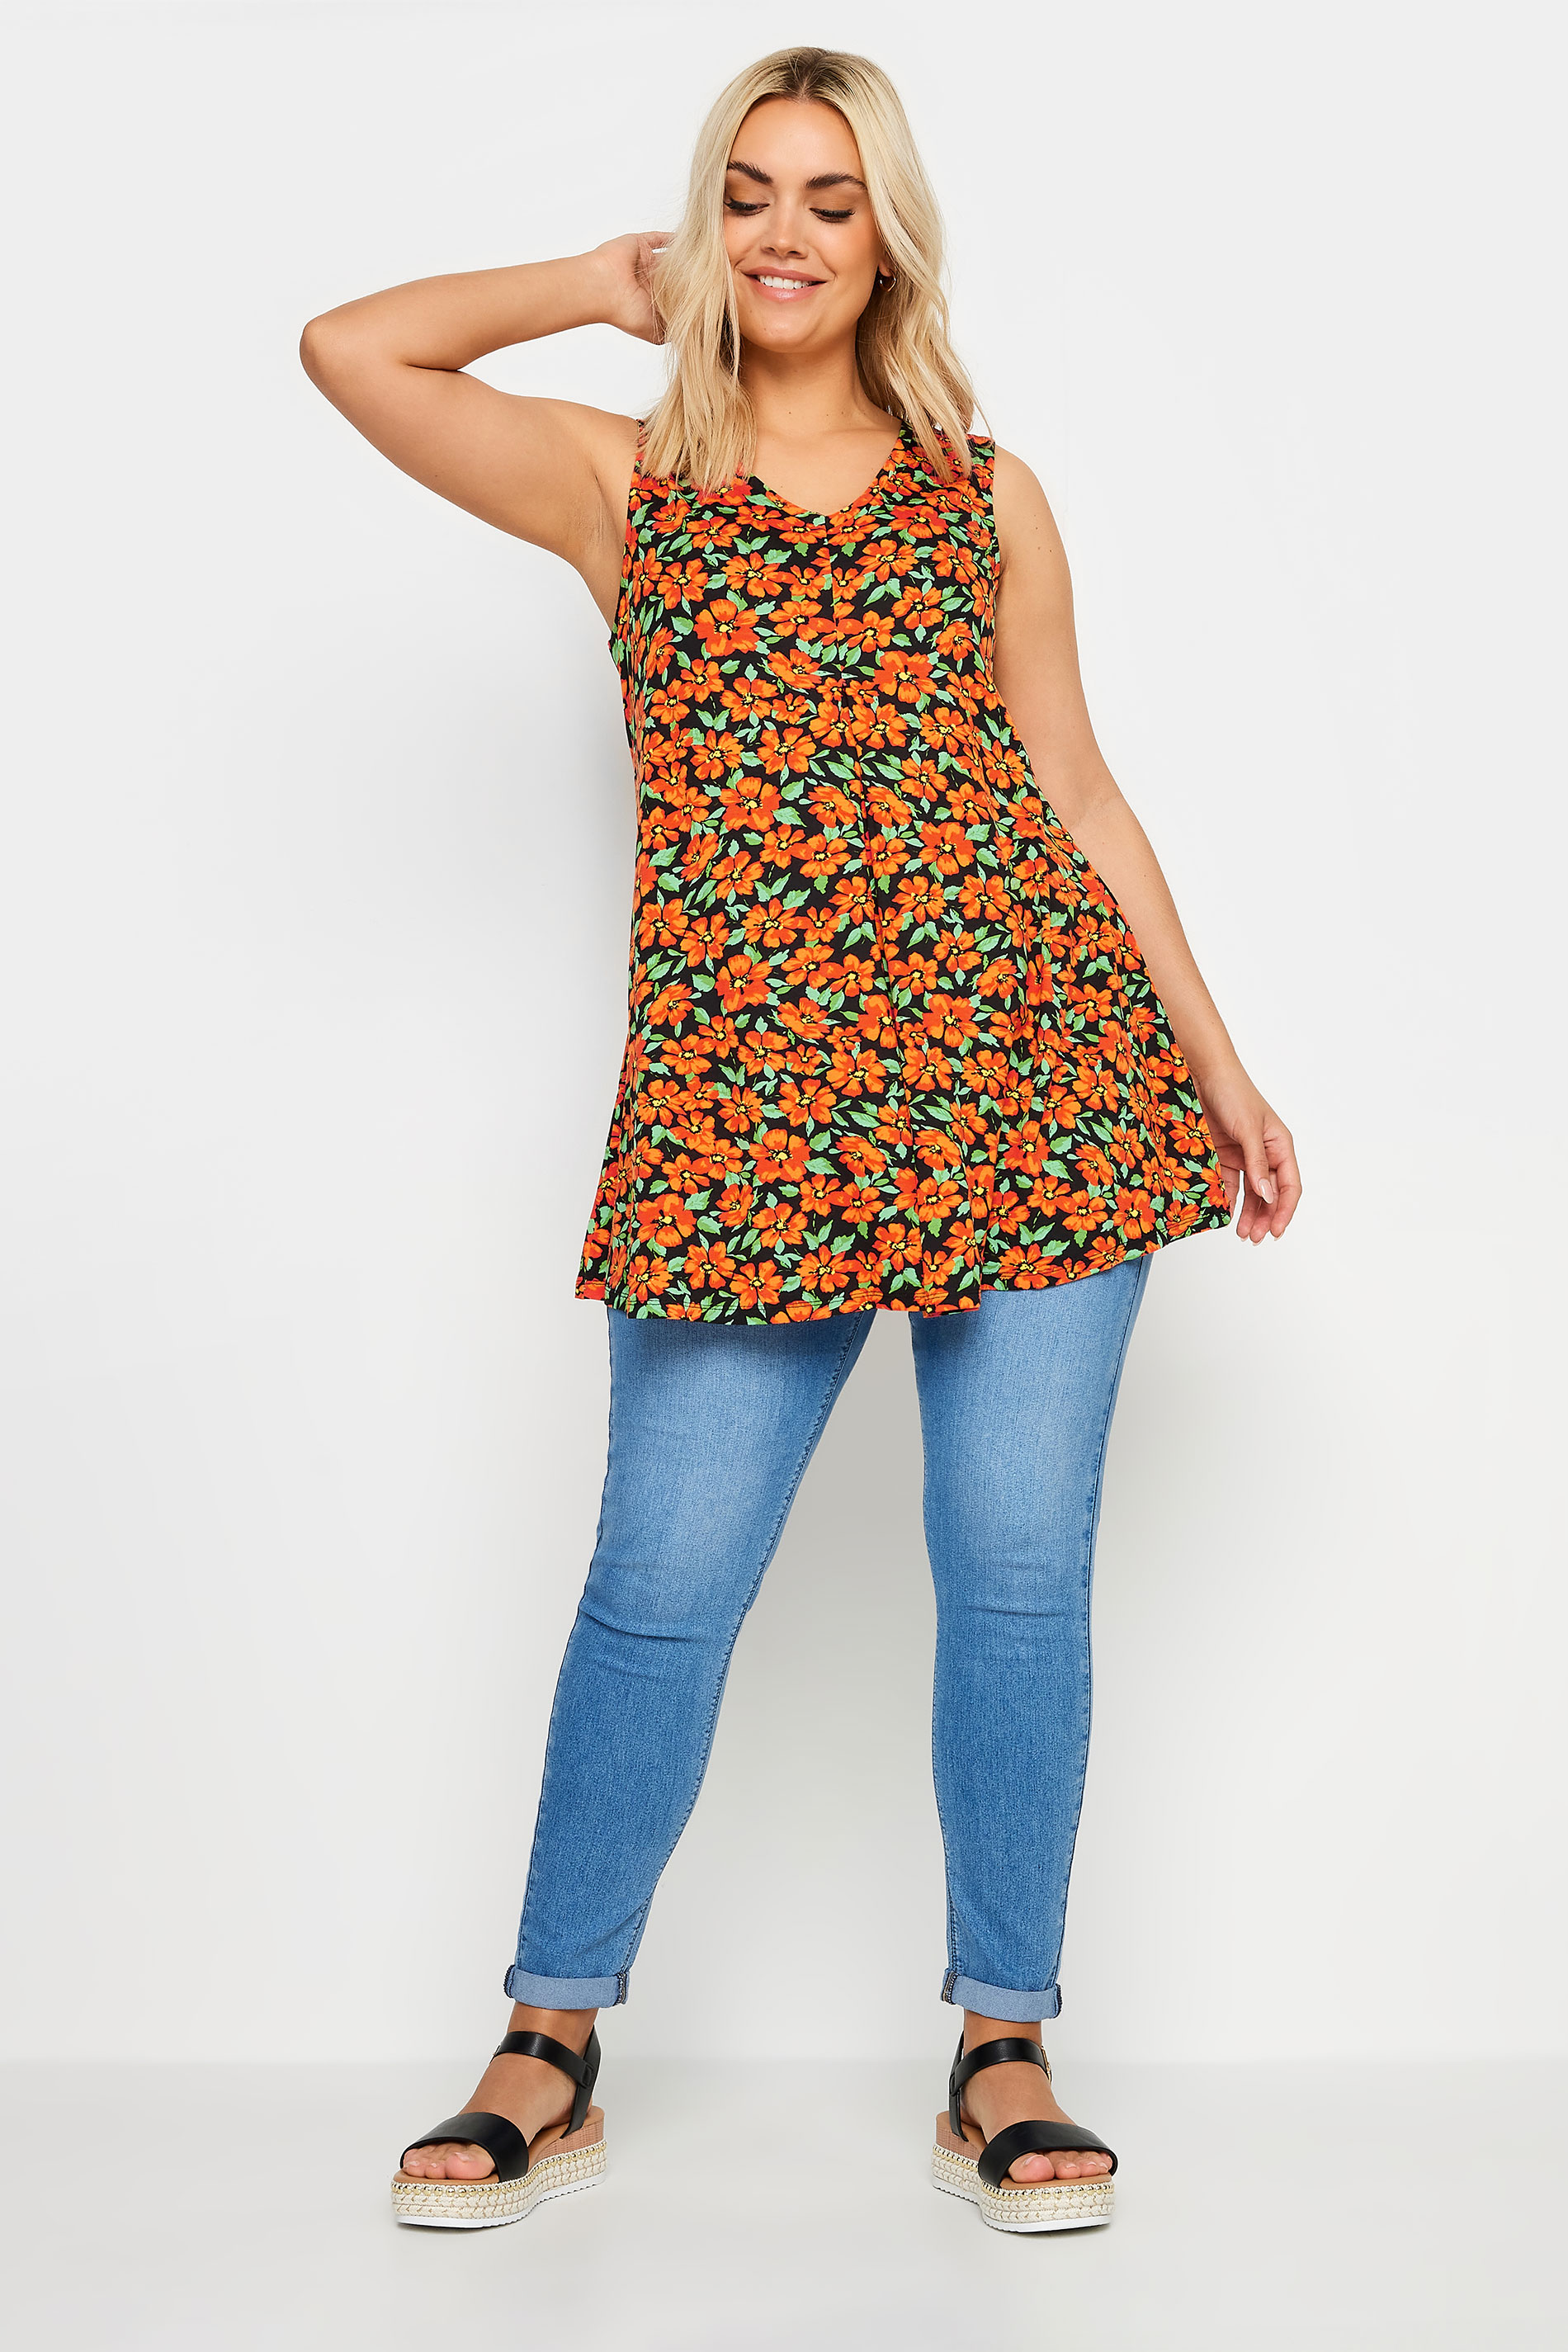 YOURS Plus Size Orange Floral Printed Vest Top | Yours Clothing 2